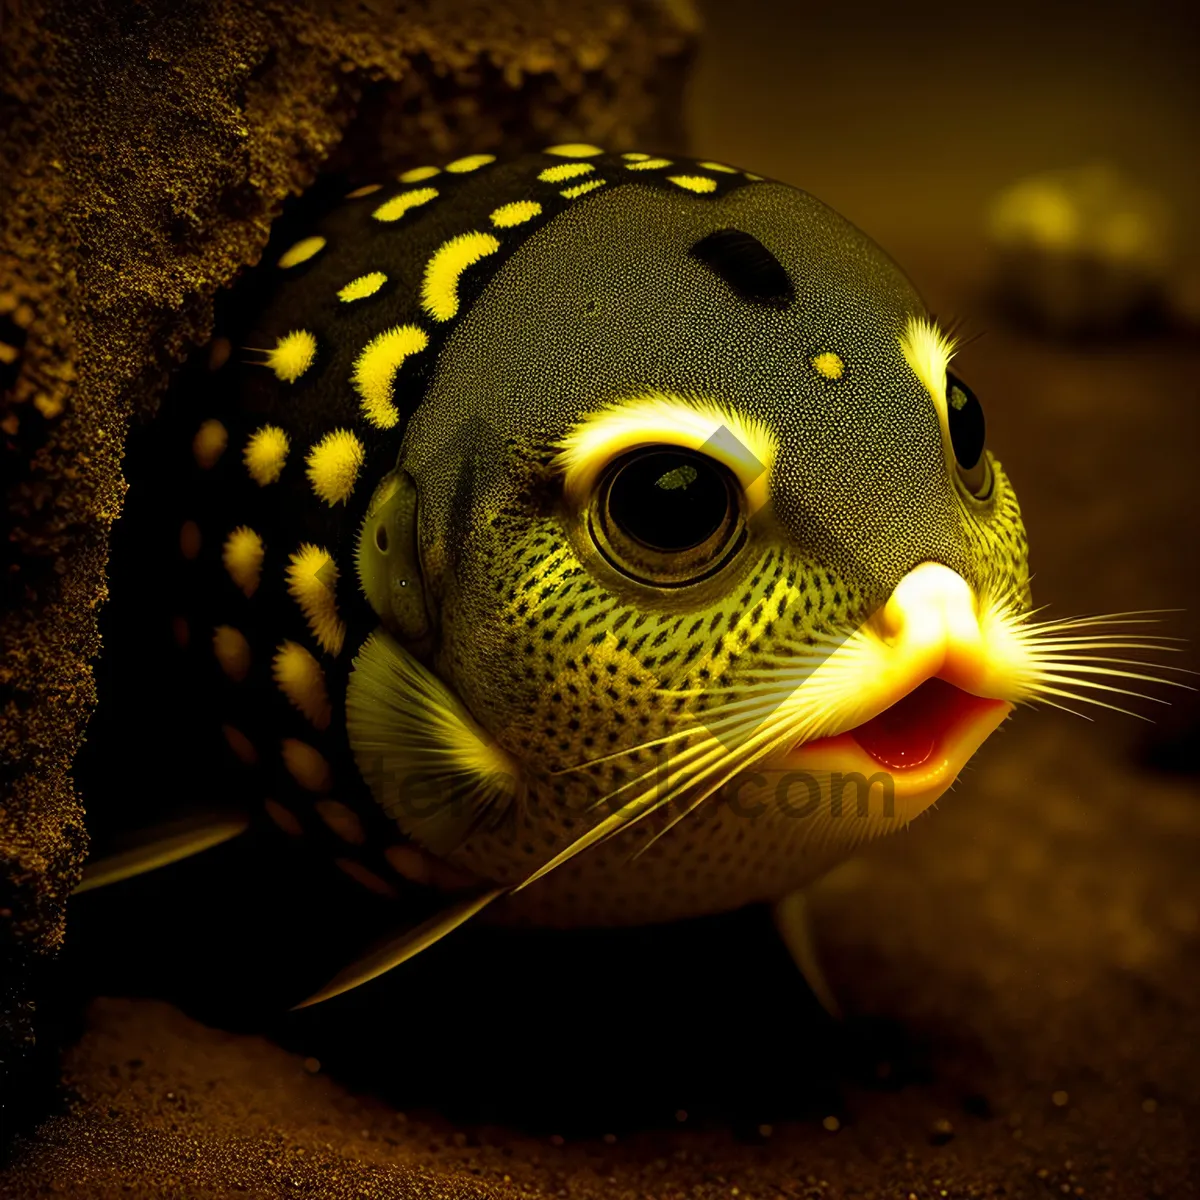 Picture of Colorful Tropical Puffer Fish Underwater"
"Exotic Marine Life in Saltwater Aquarium"
"Diving Into the Vibrant Underwater World"
"Mesmerizing Undersea Coral Reef Wildlife"
"Enchanting Eye of the Tropical Fish